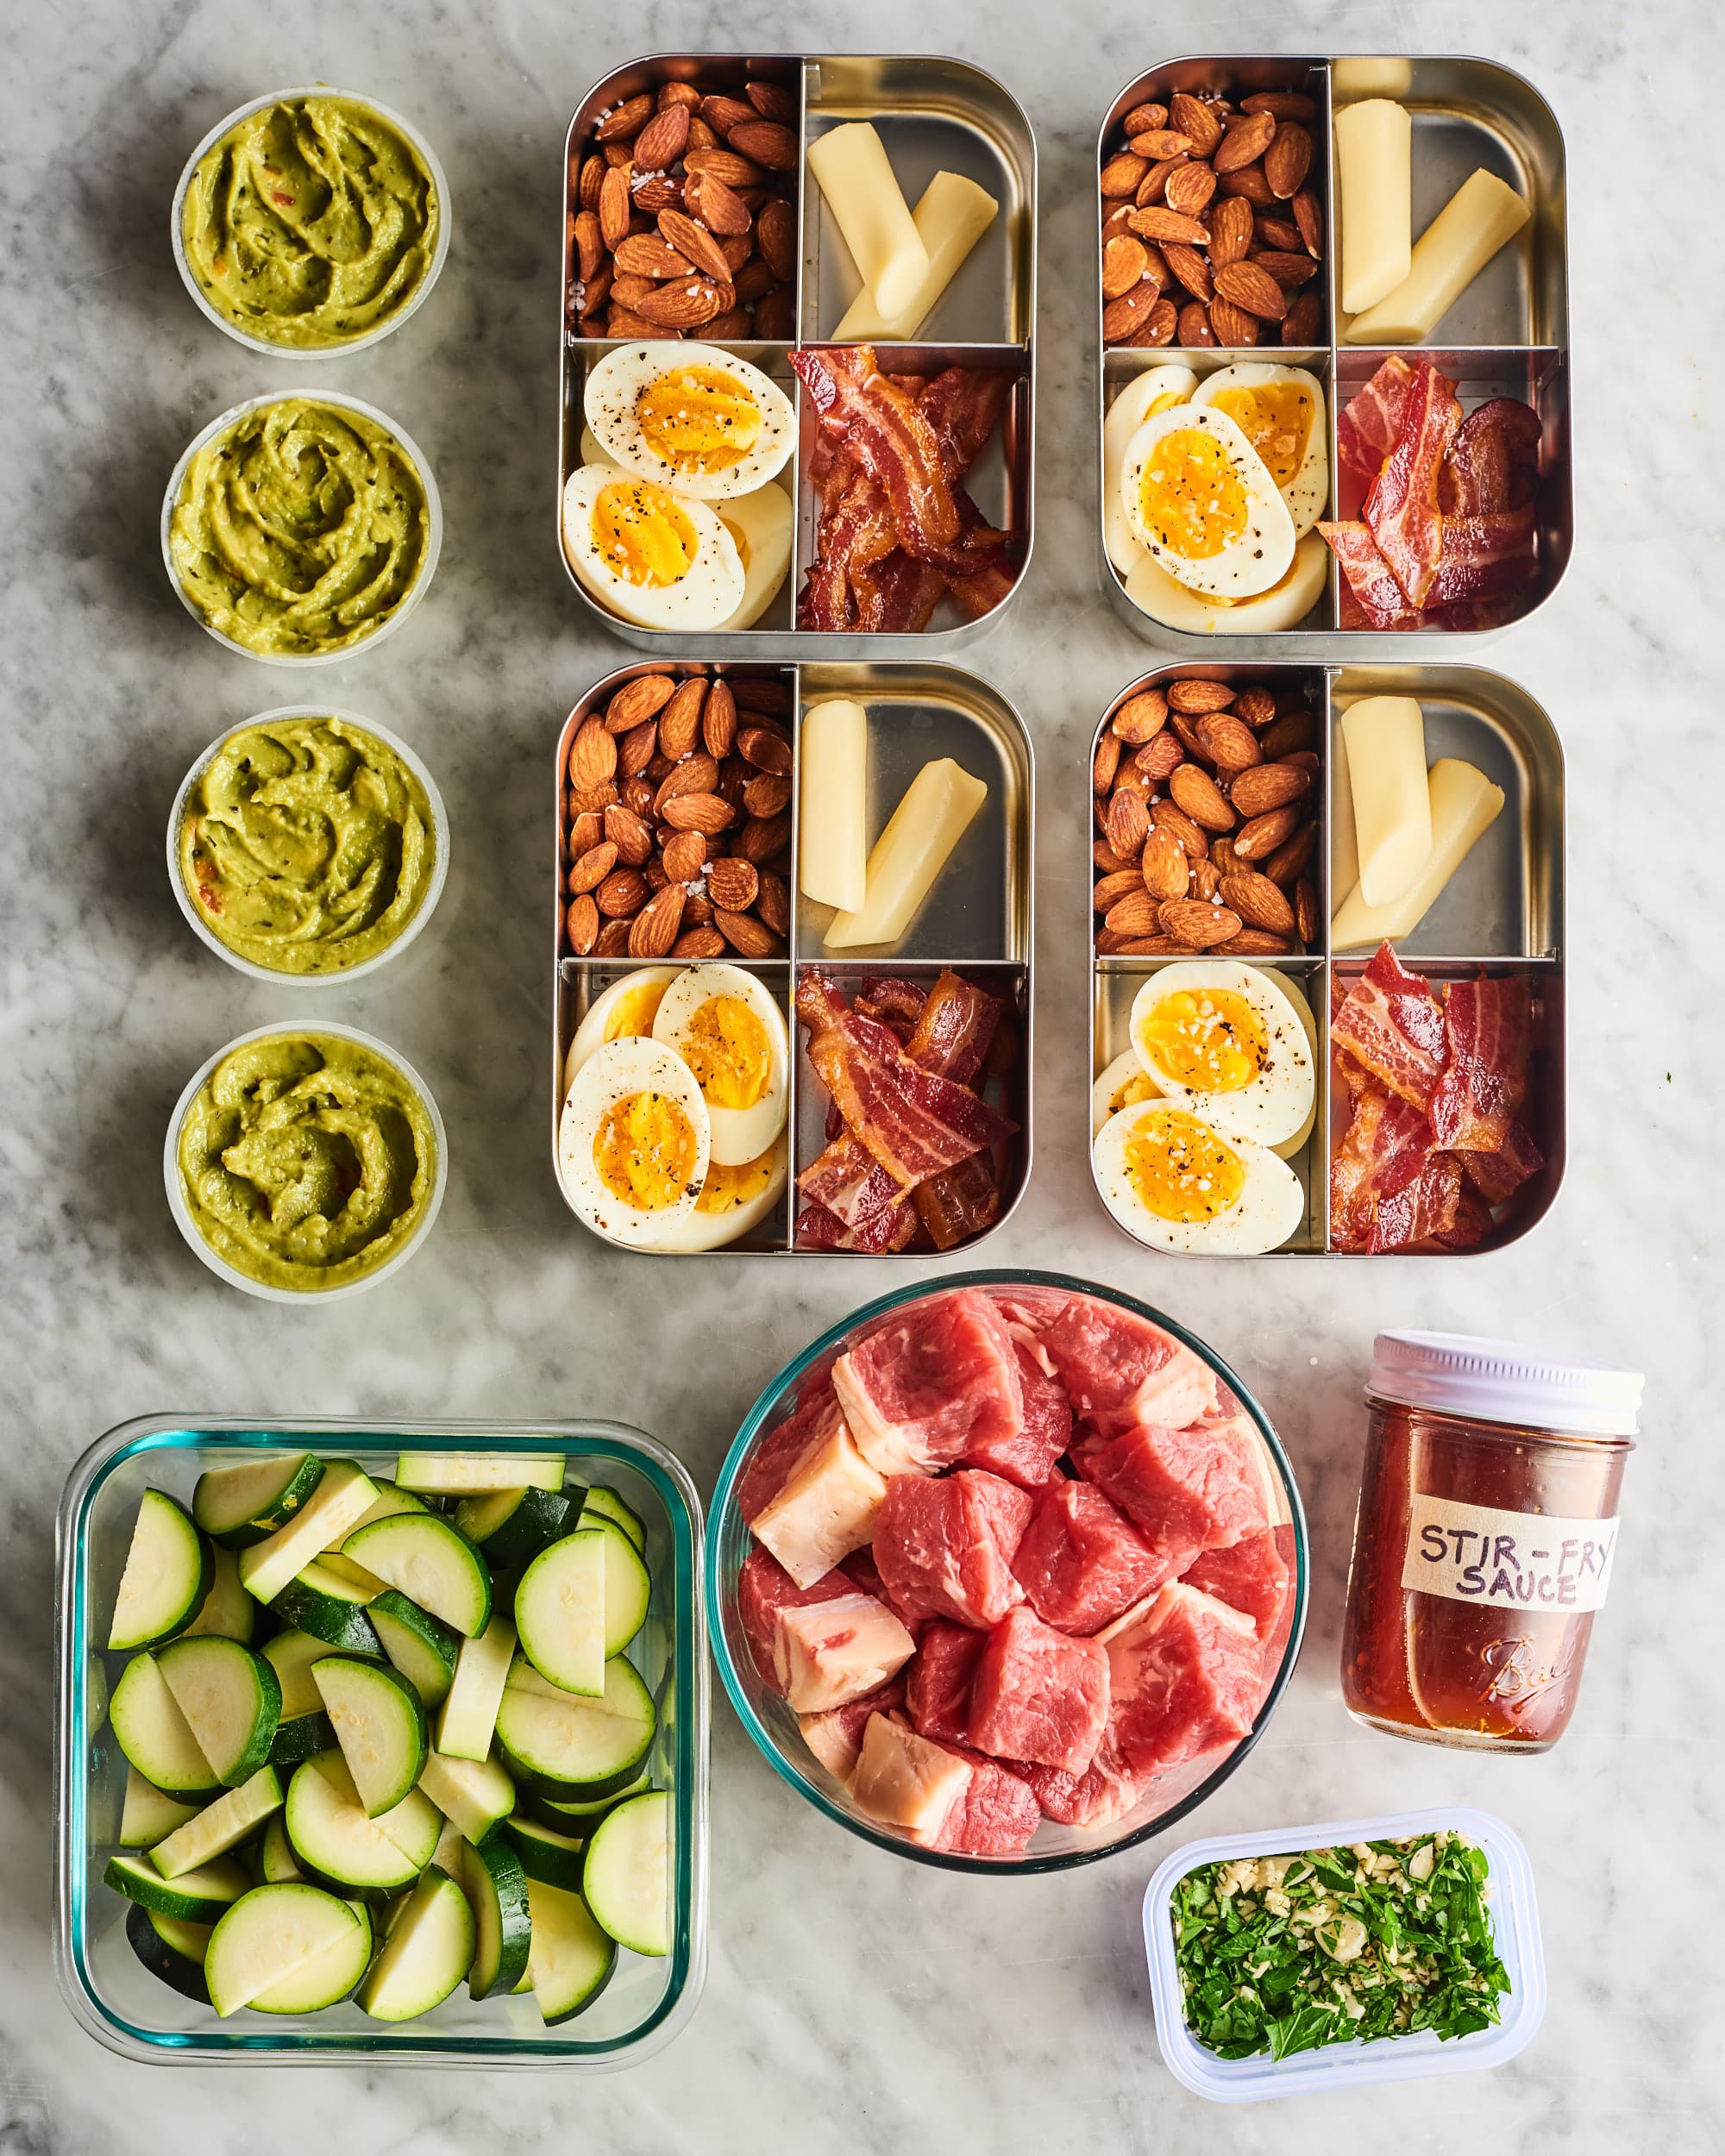 Shoppers Love These Lunch Boxes for Meal Prep, and You Can